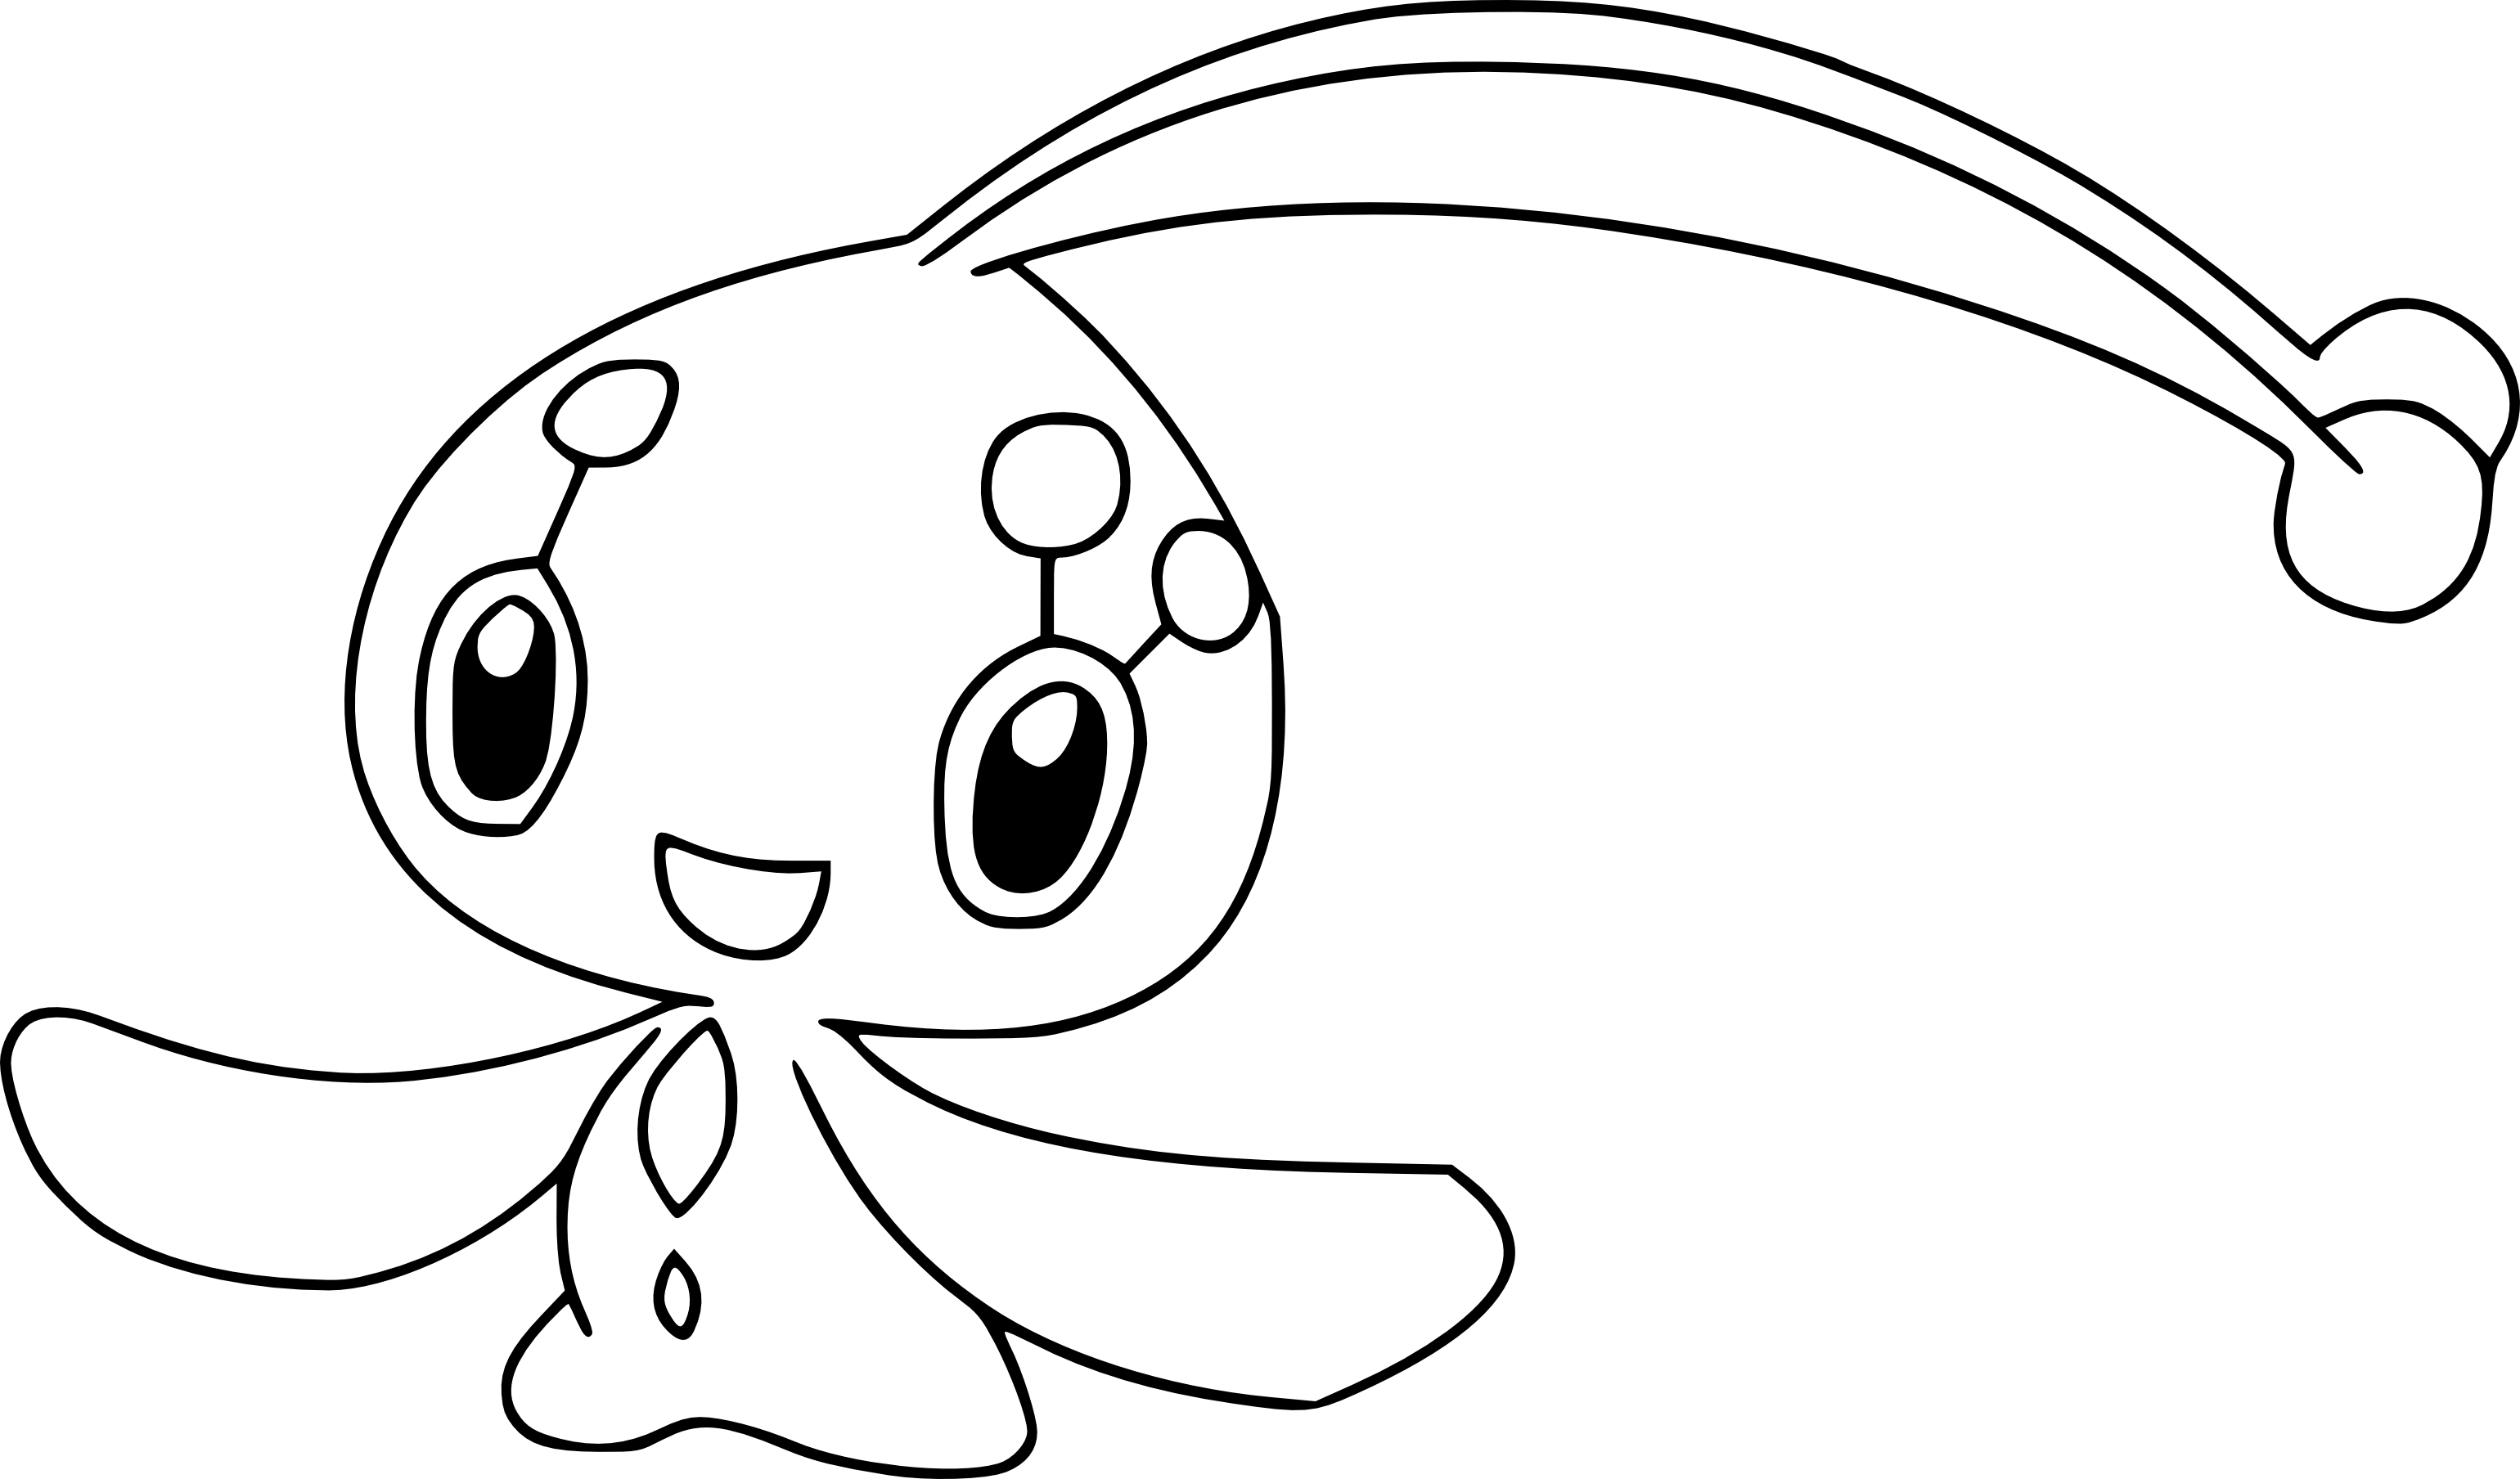 Manaphy Pokemon coloring page